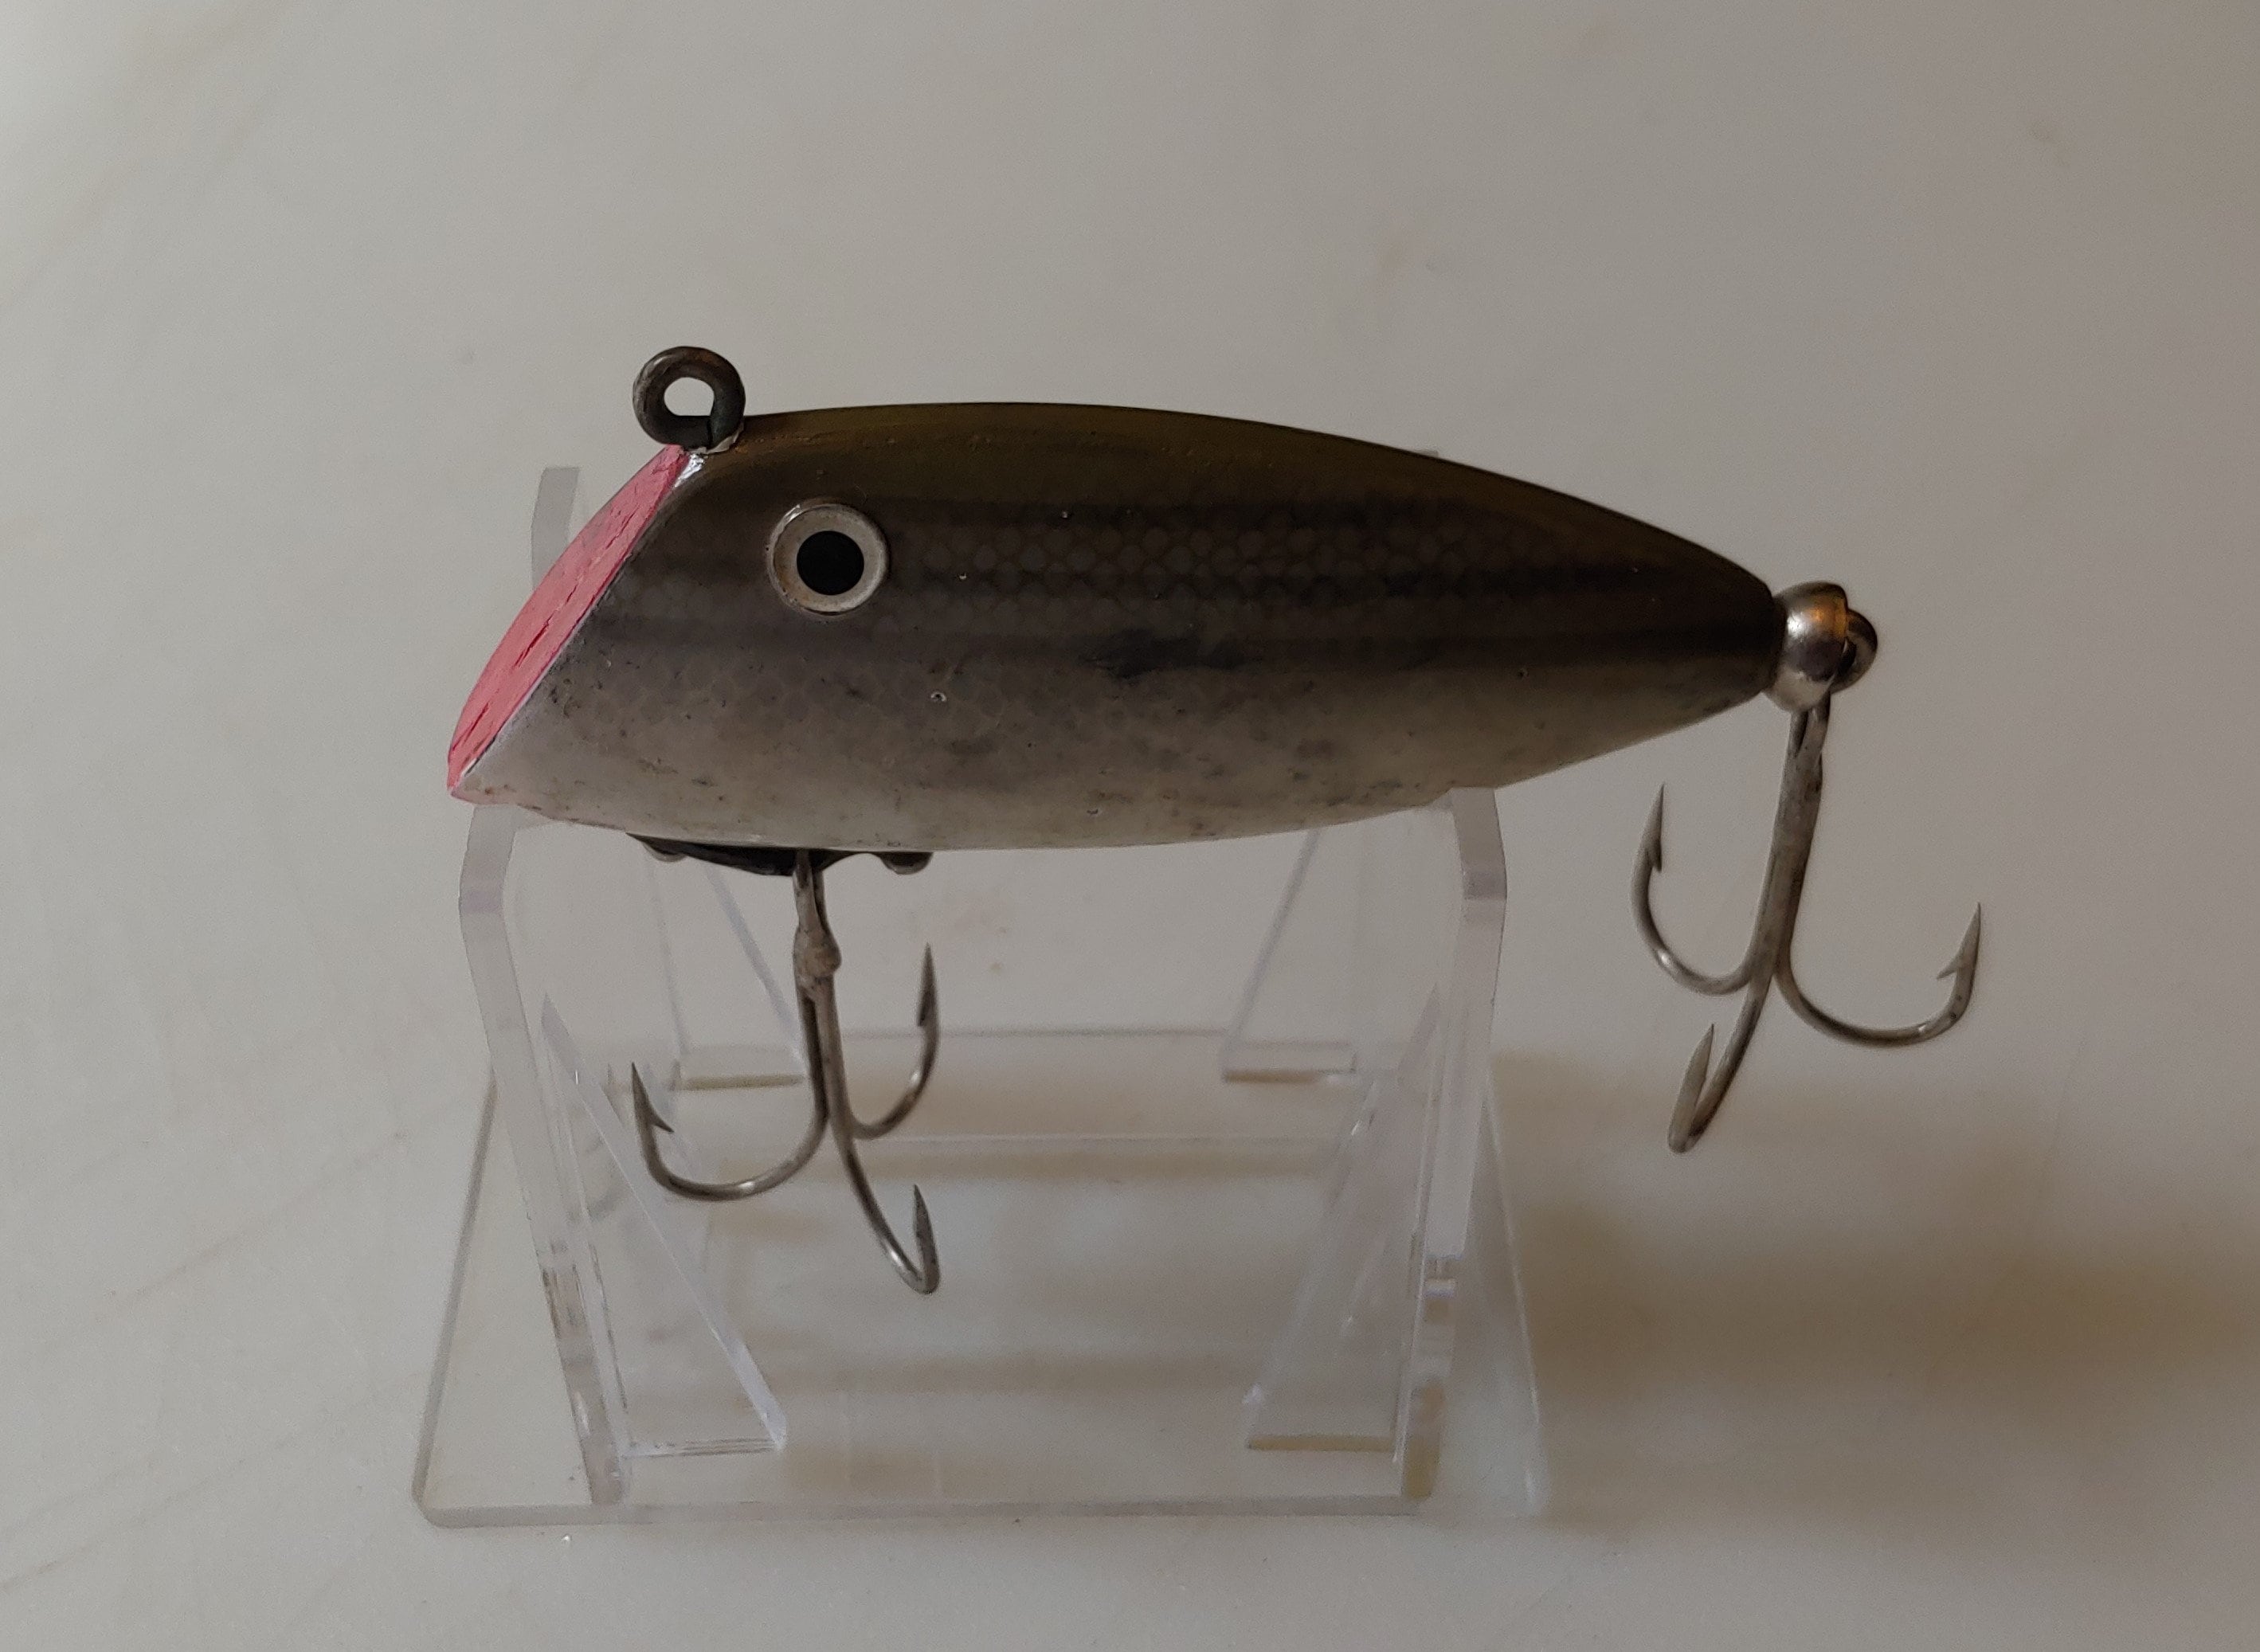 Vintage Bayou Boogie Fishing Lure, Vintage Fishing Tackle Home Decor,  Vintage Fishing Tackle Fisherman Gifts for Him 